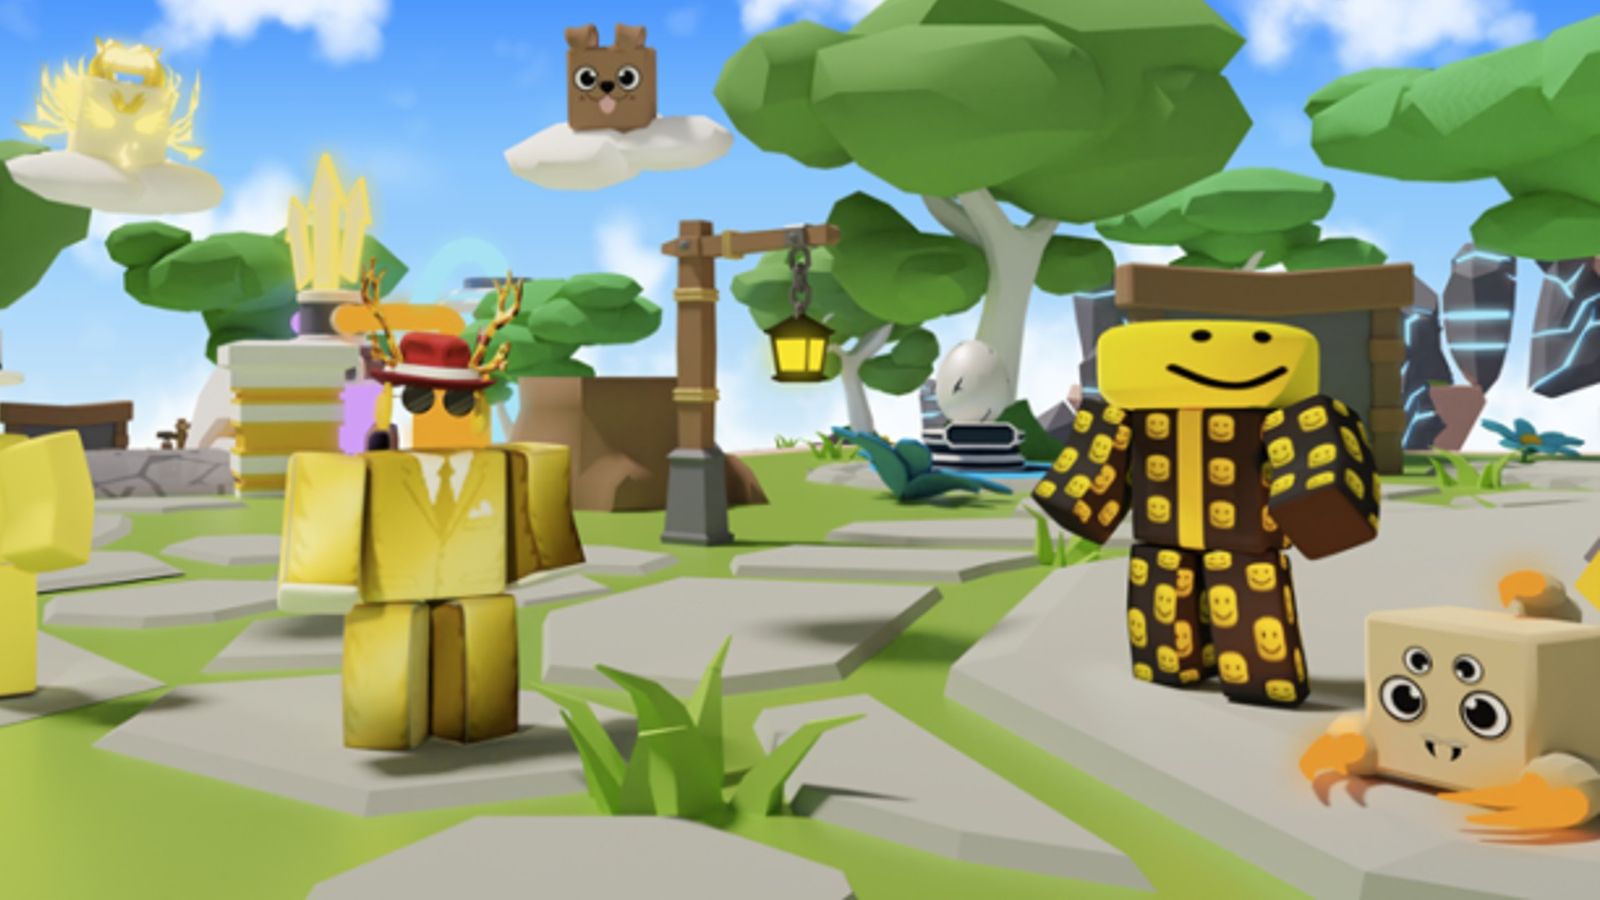 Image of various Roblox characters in Tapping Legends X.